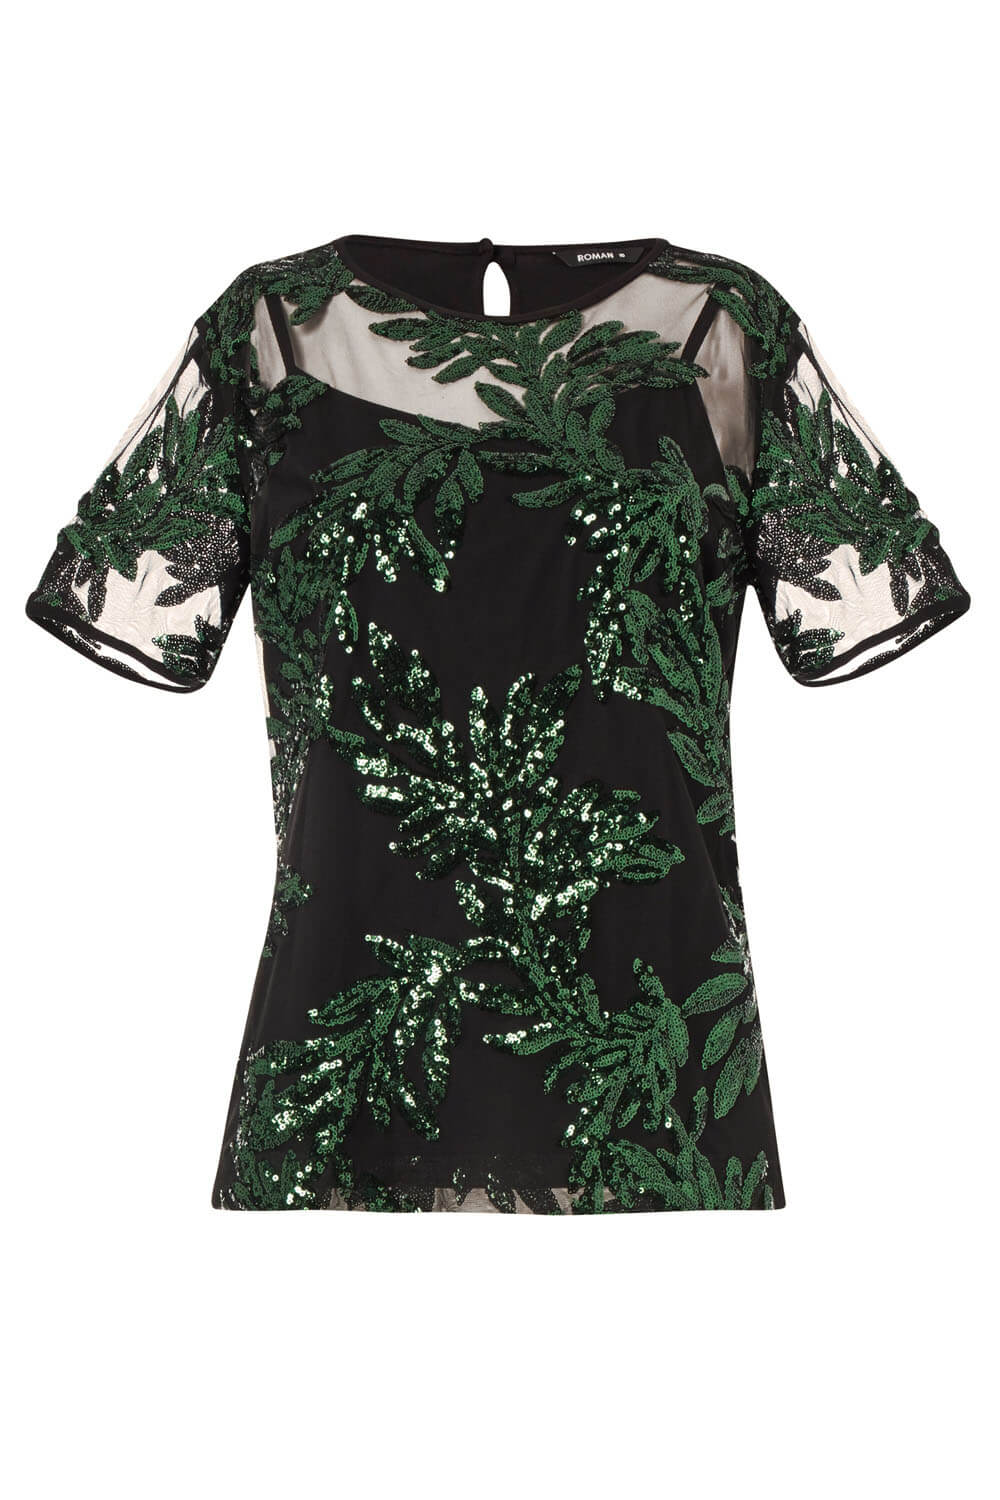 Green Leaf Mesh Embroidered Top, Image 5 of 5